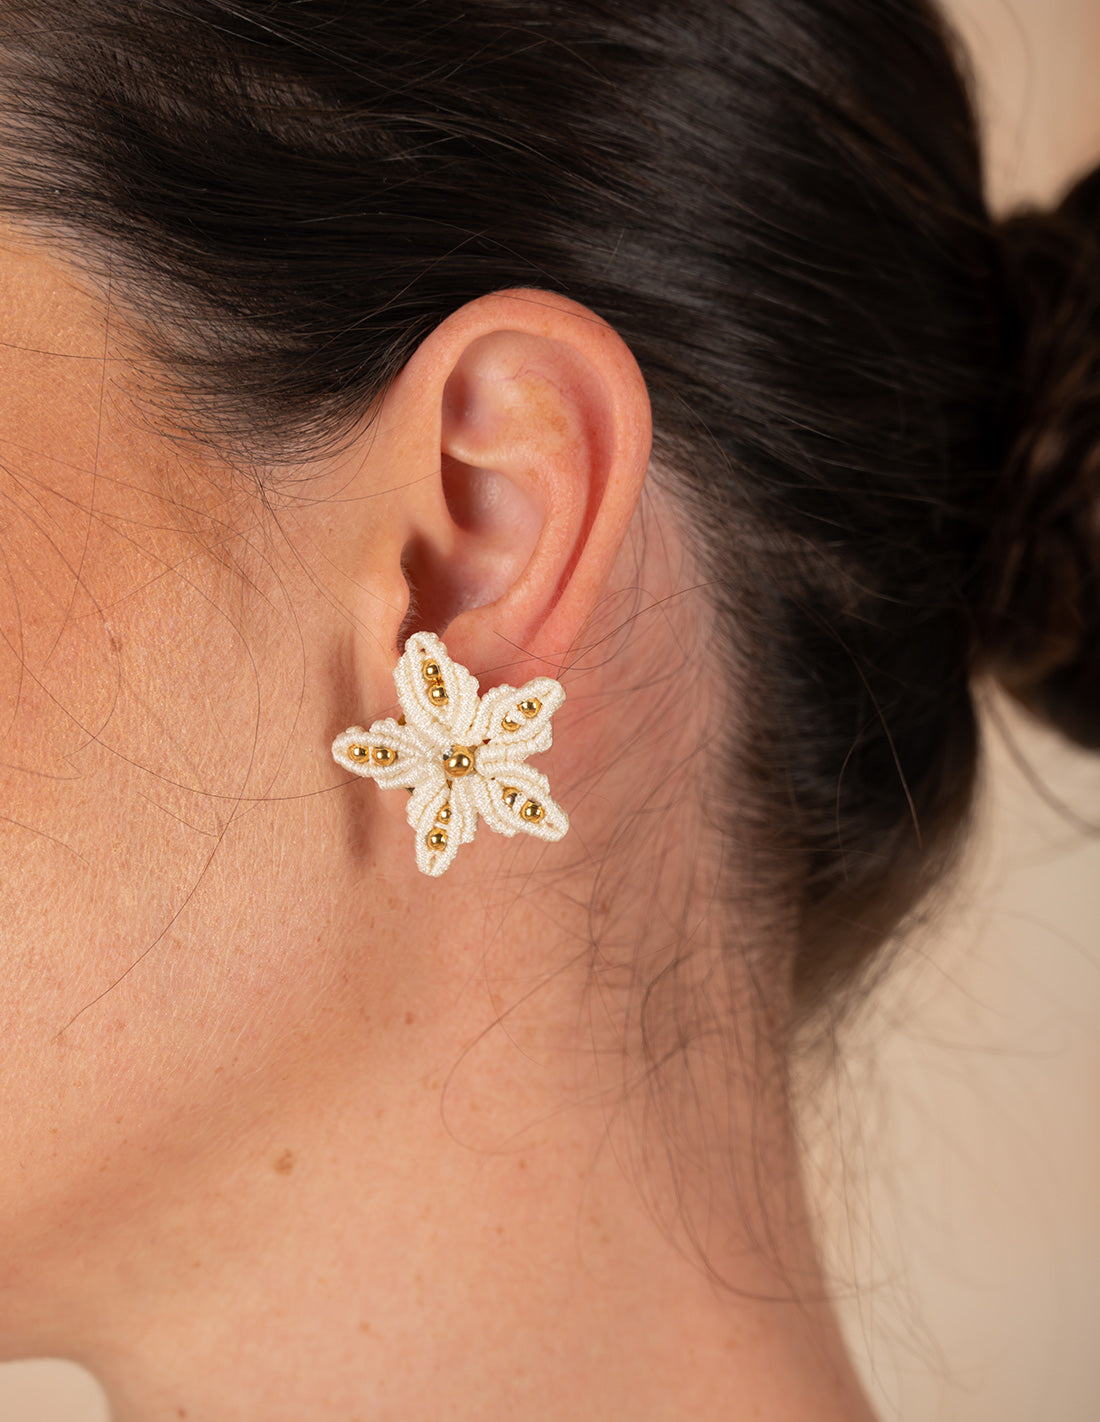 Clematis Earring Ivory. Earring In Ivory. Entreaguas